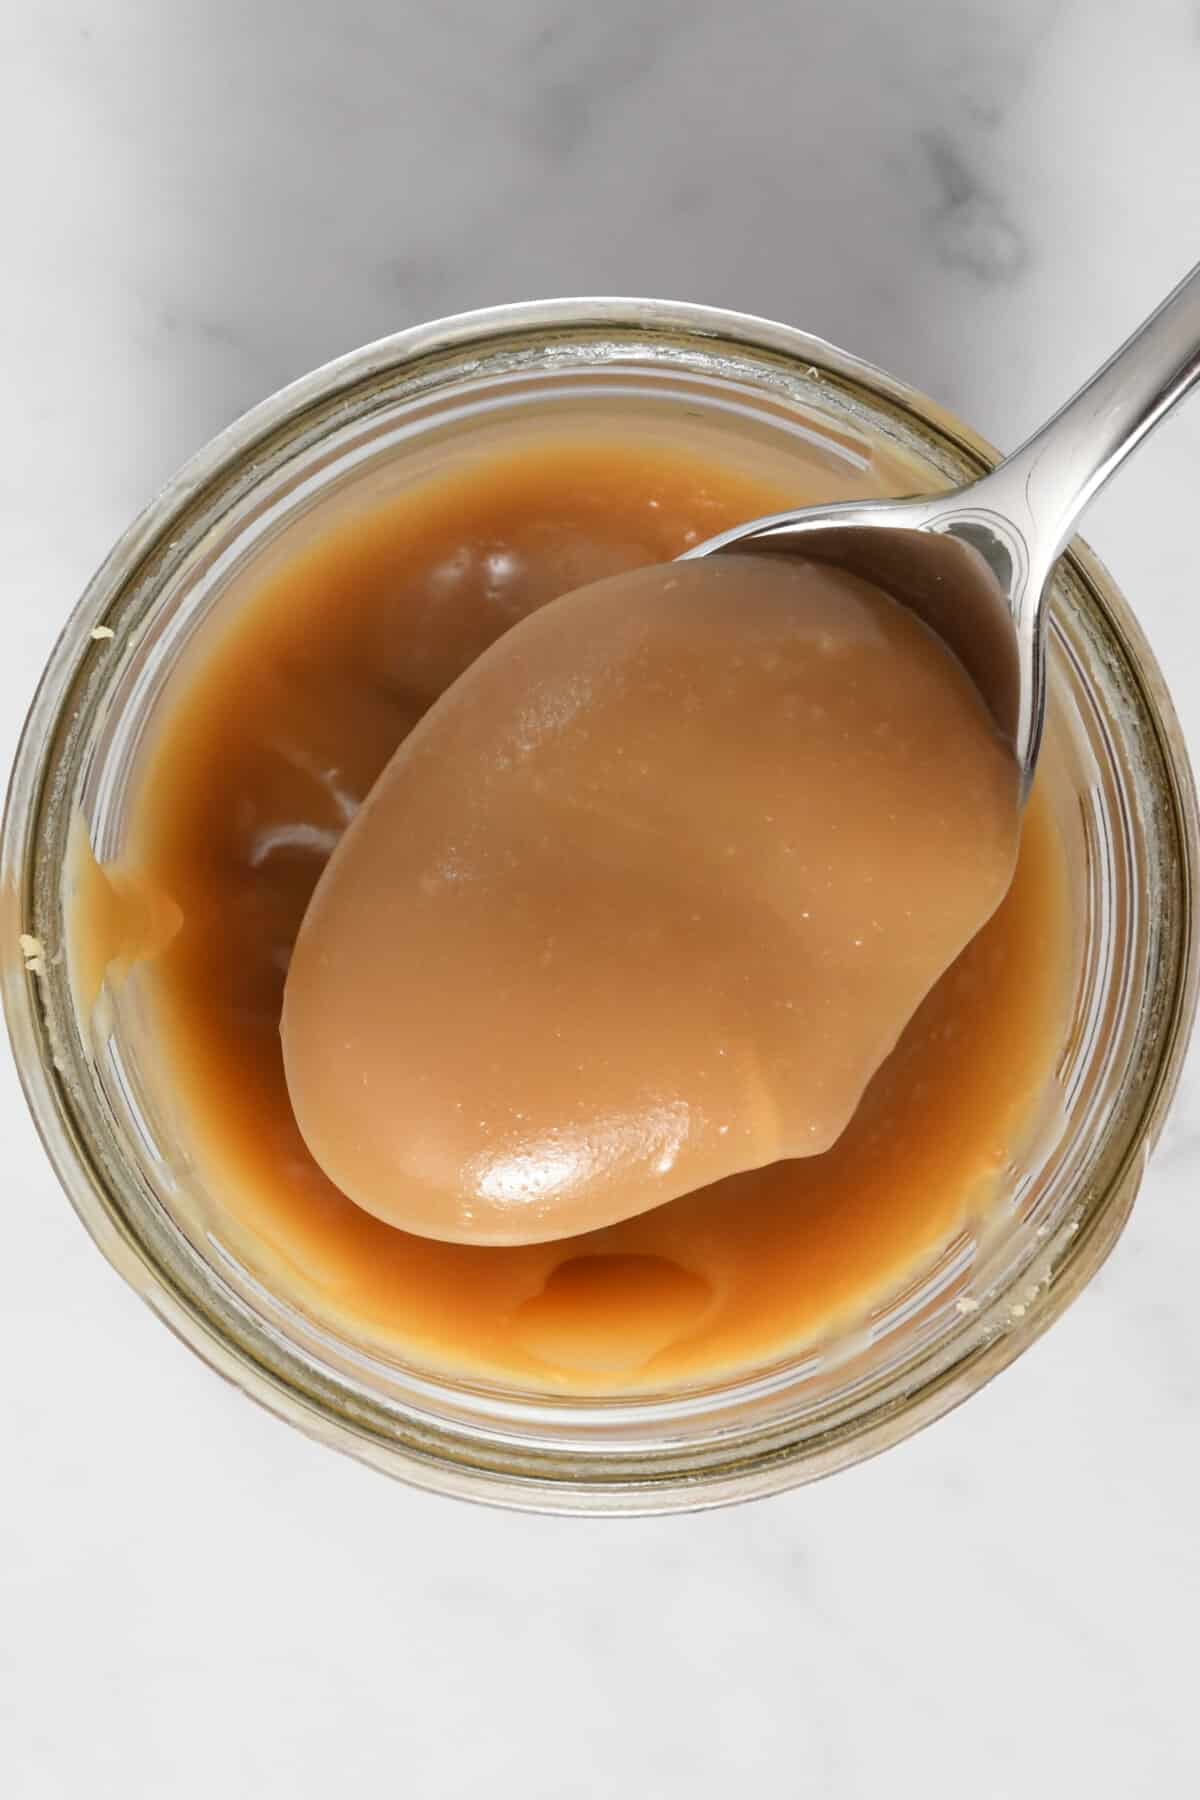 A metal spoon with a scoop of caramel sauce in a glass jar.